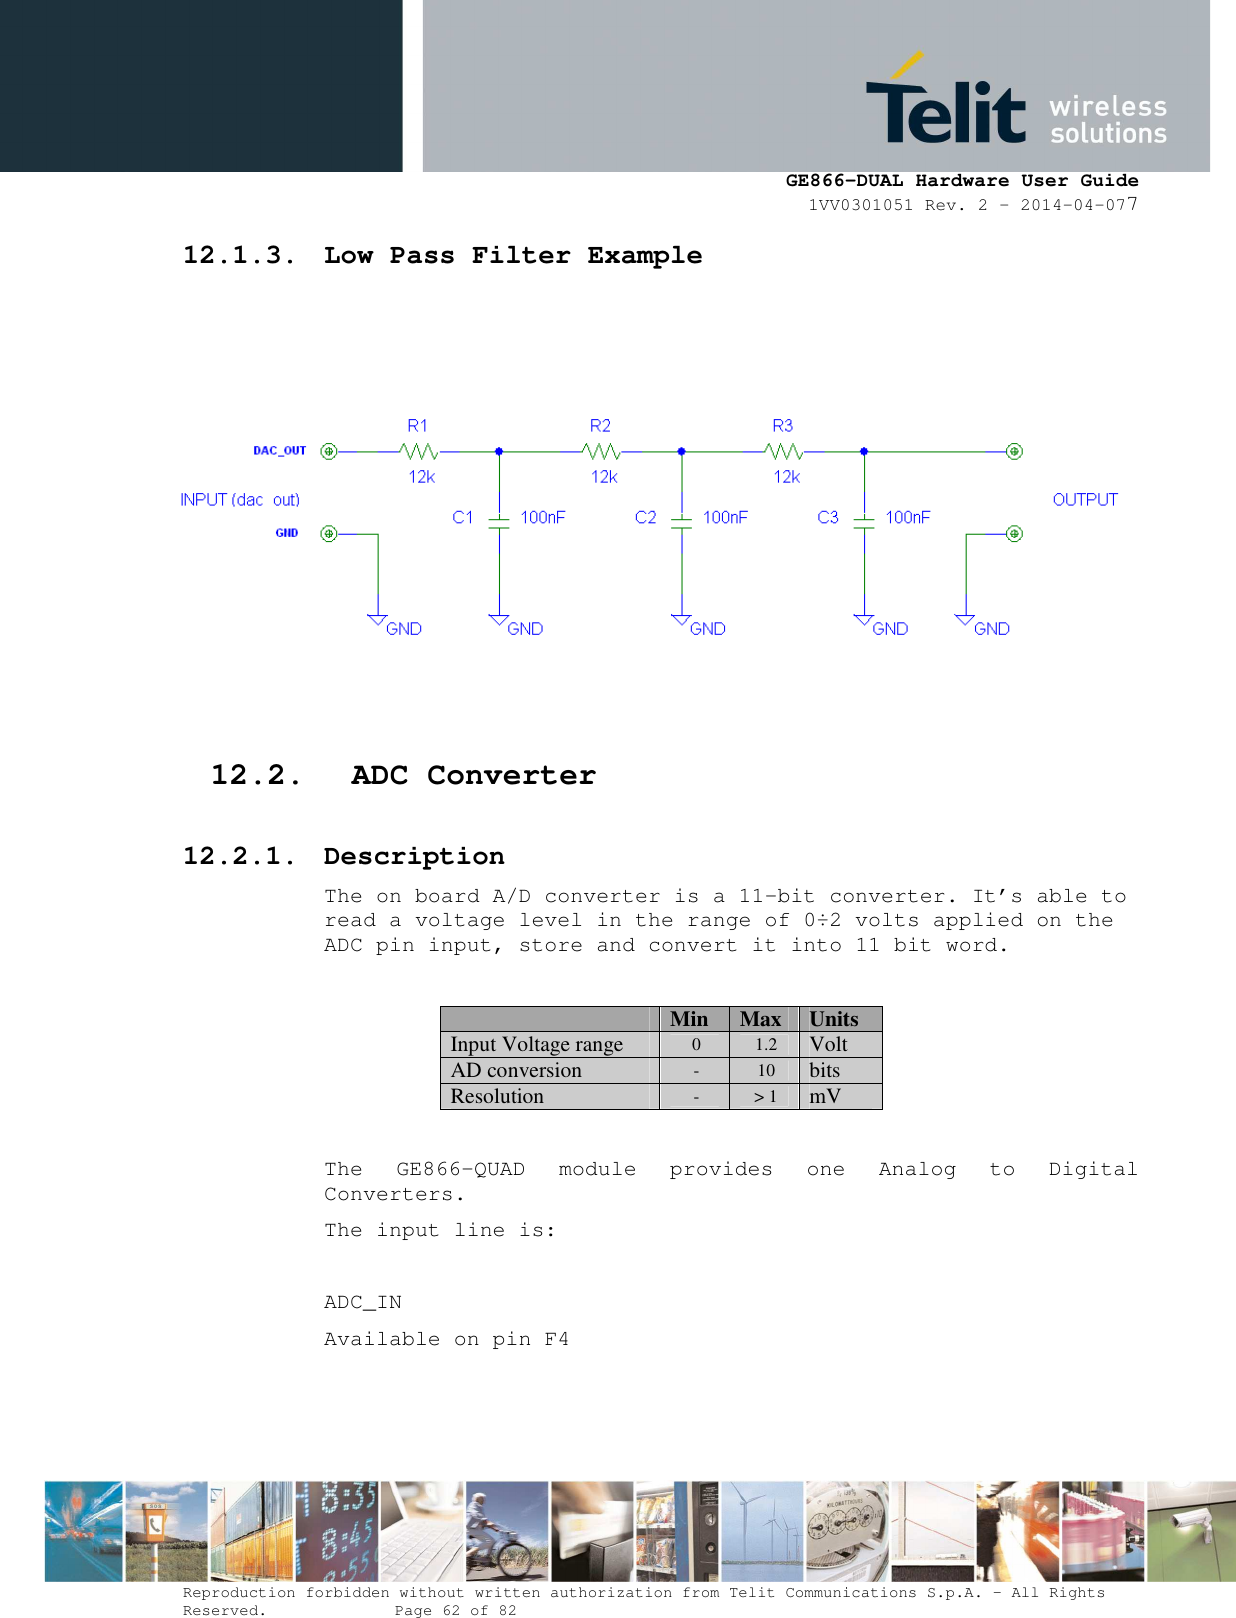      GE866-DUAL Hardware User Guide 1VV0301051 Rev. 2 – 2014-04-077  Reproduction forbidden without written authorization from Telit Communications S.p.A. - All Rights Reserved.    Page 62 of 82 Mod. 0805 2011-07 Rev.2 12.1.3. Low Pass Filter Example    12.2. ADC Converter 12.2.1. Description The on board A/D converter is a 11-bit converter. It’s able to read a voltage level in the range of 0÷2 volts applied on the ADC pin input, store and convert it into 11 bit word.   Min Max Units Input Voltage range 0  1.2 Volt AD conversion -  10 bits Resolution -  &gt; 1 mV  The  GE866-QUAD  module  provides  one  Analog  to  Digital Converters.  The input line is:  ADC_IN   Available on pin F4   